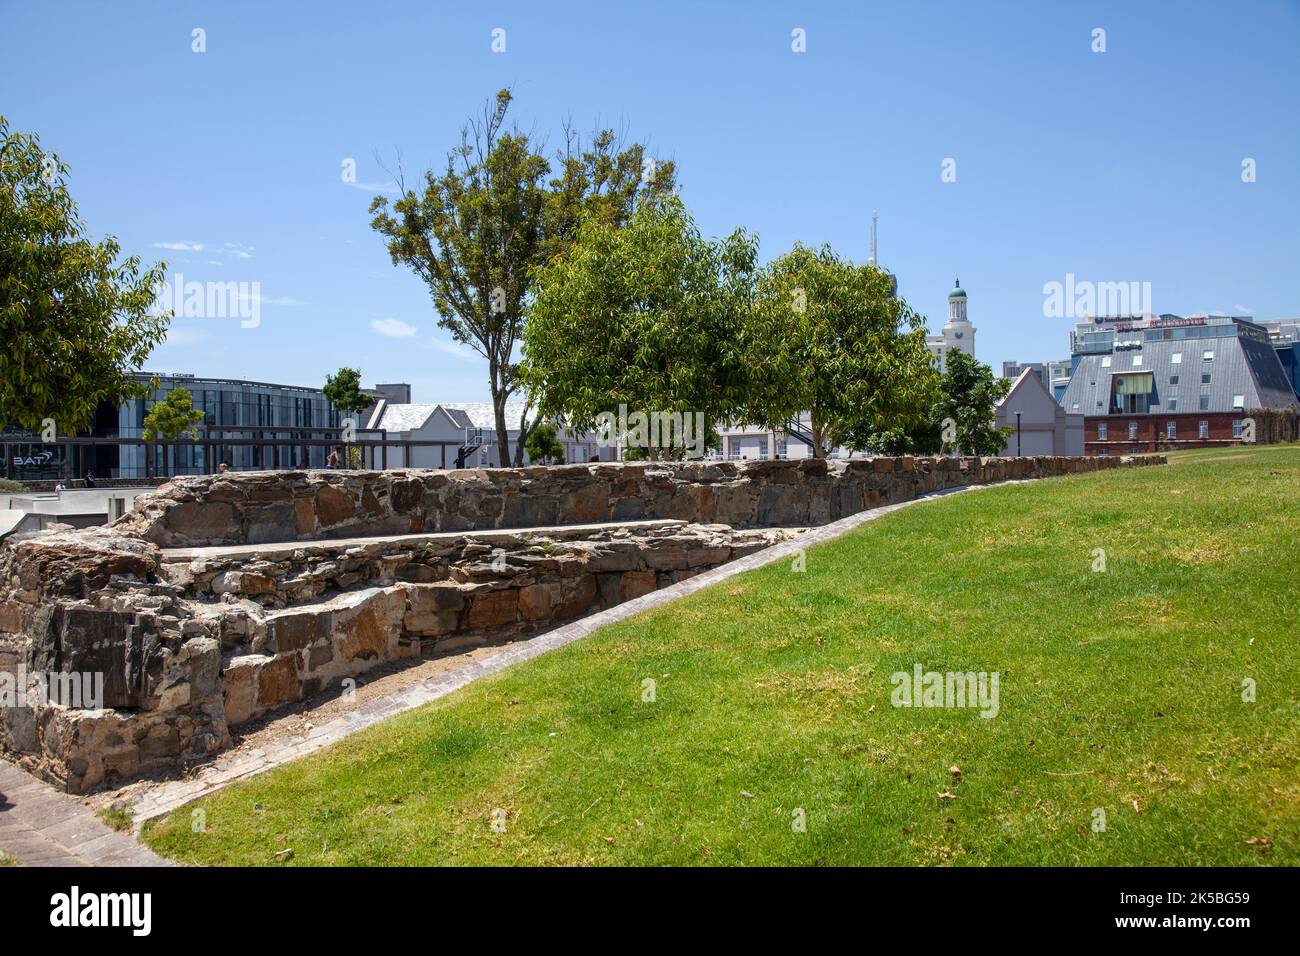 Cape Town Battery Park - Remnant of Old Dutch Forticfication Wall  - South Africa Stock Photo